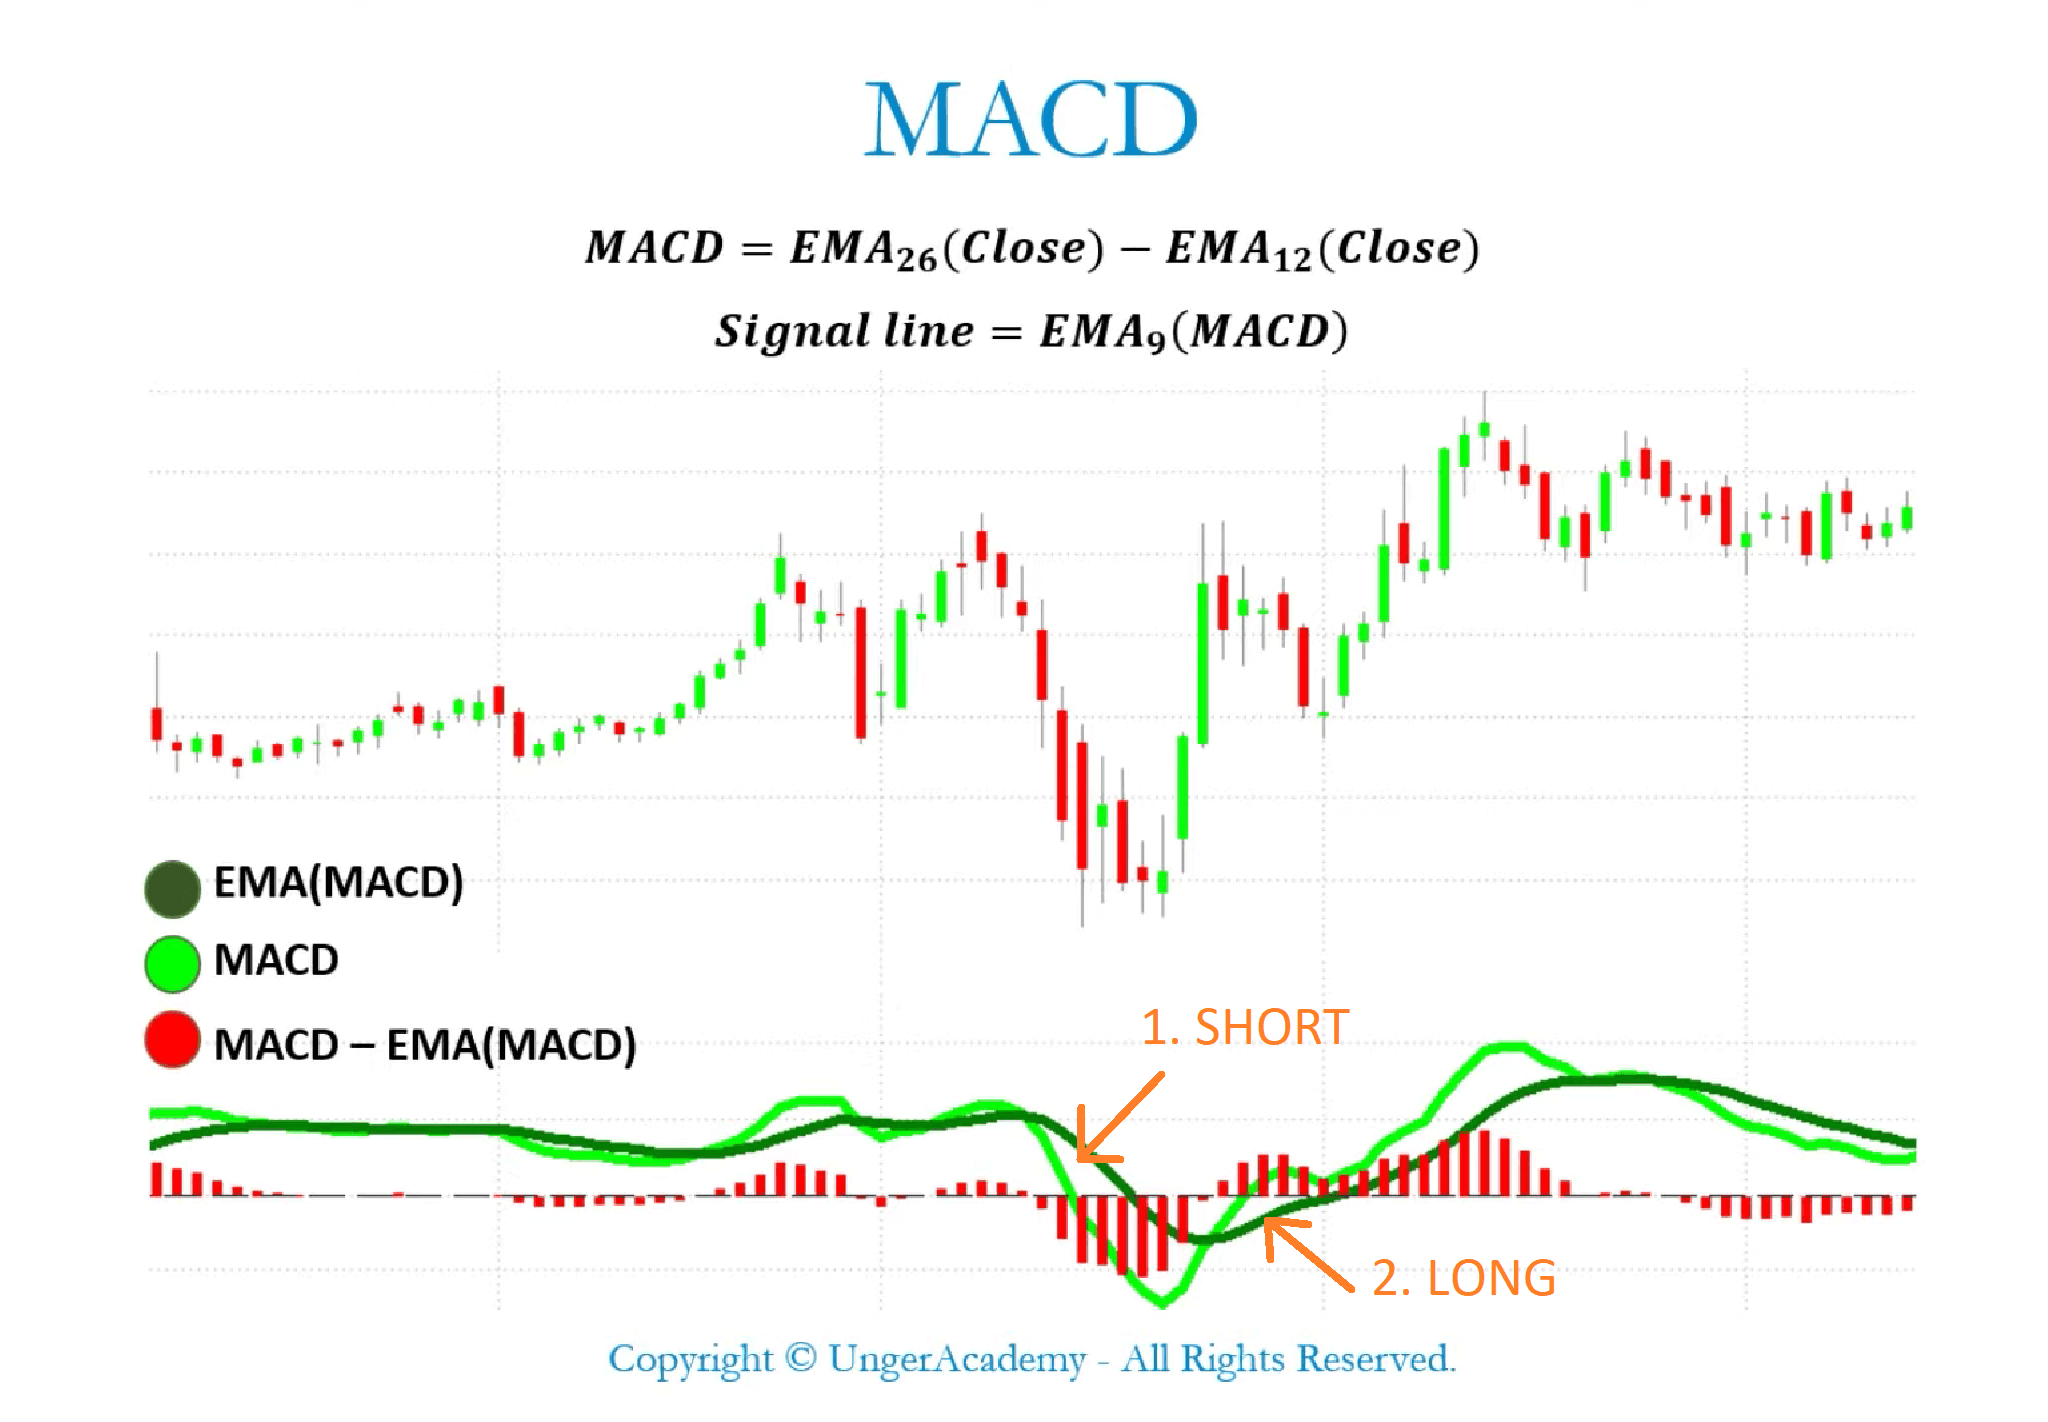 trading with the MACD indicator signals